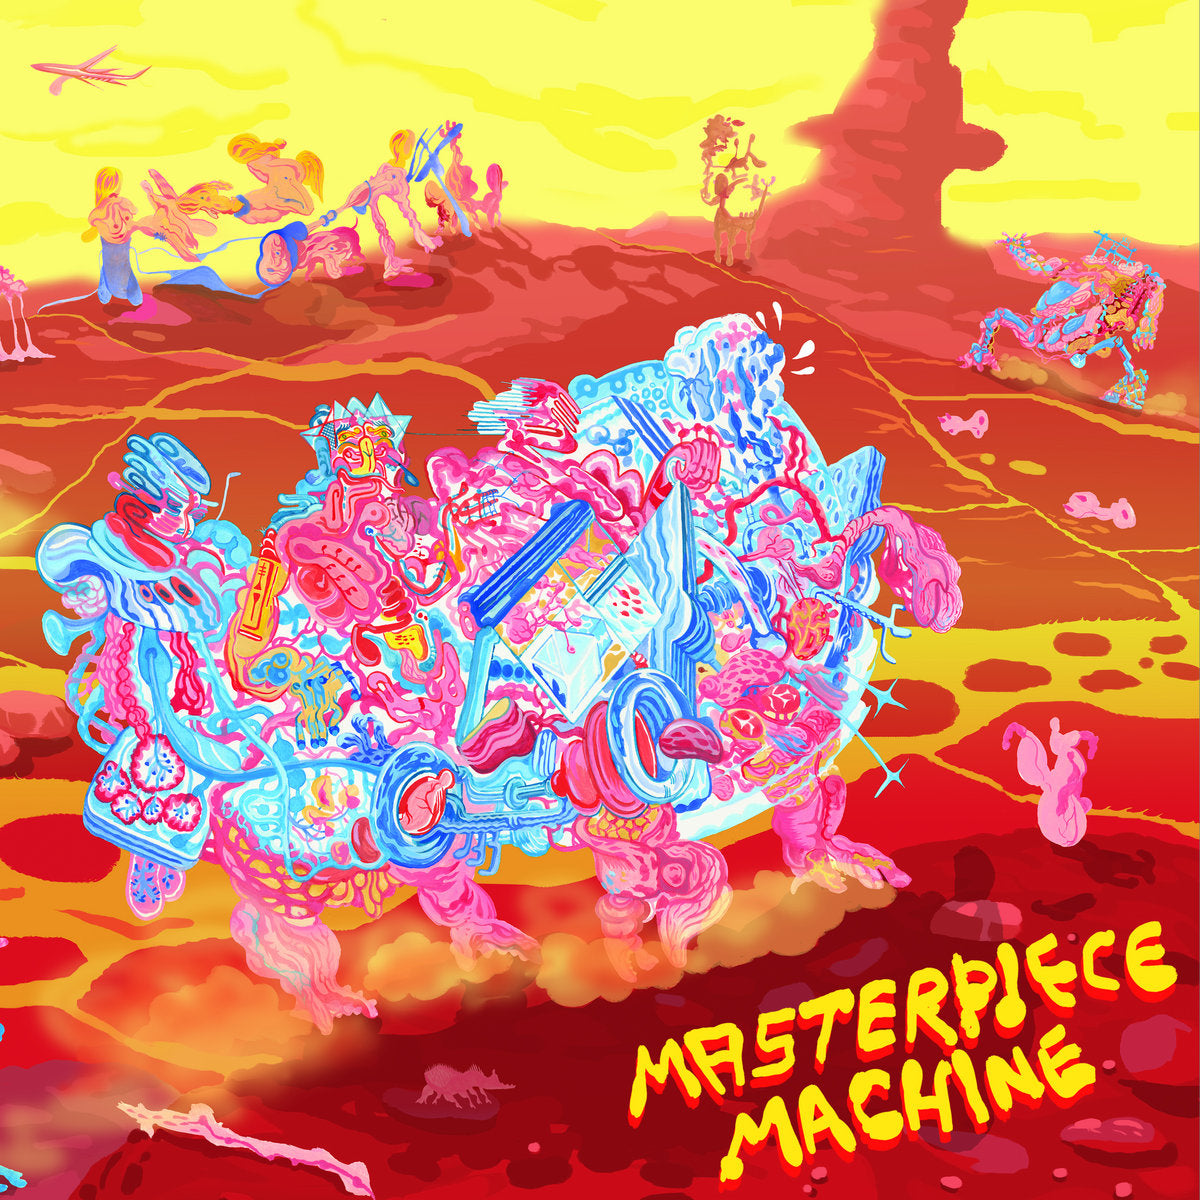 MASTERPIECE MACHINE "Rotting Fruit / Letting You In On a Secret" 12"